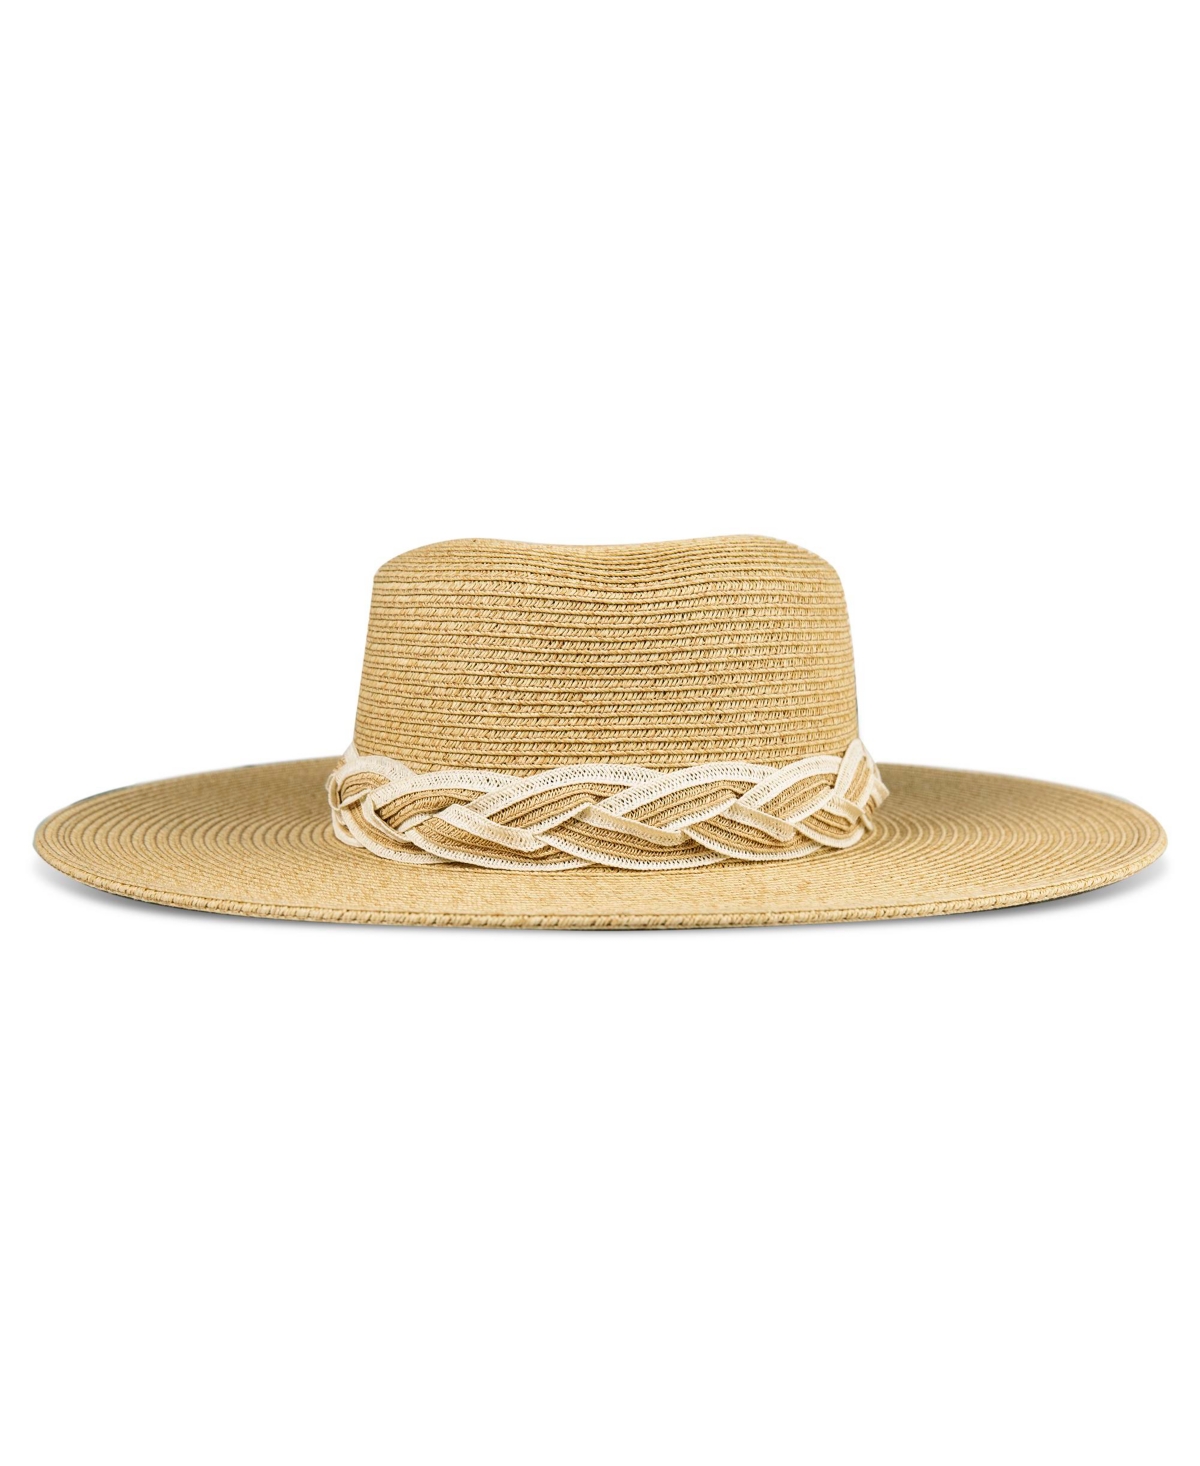 Women's Straw Boater Hat - Natural